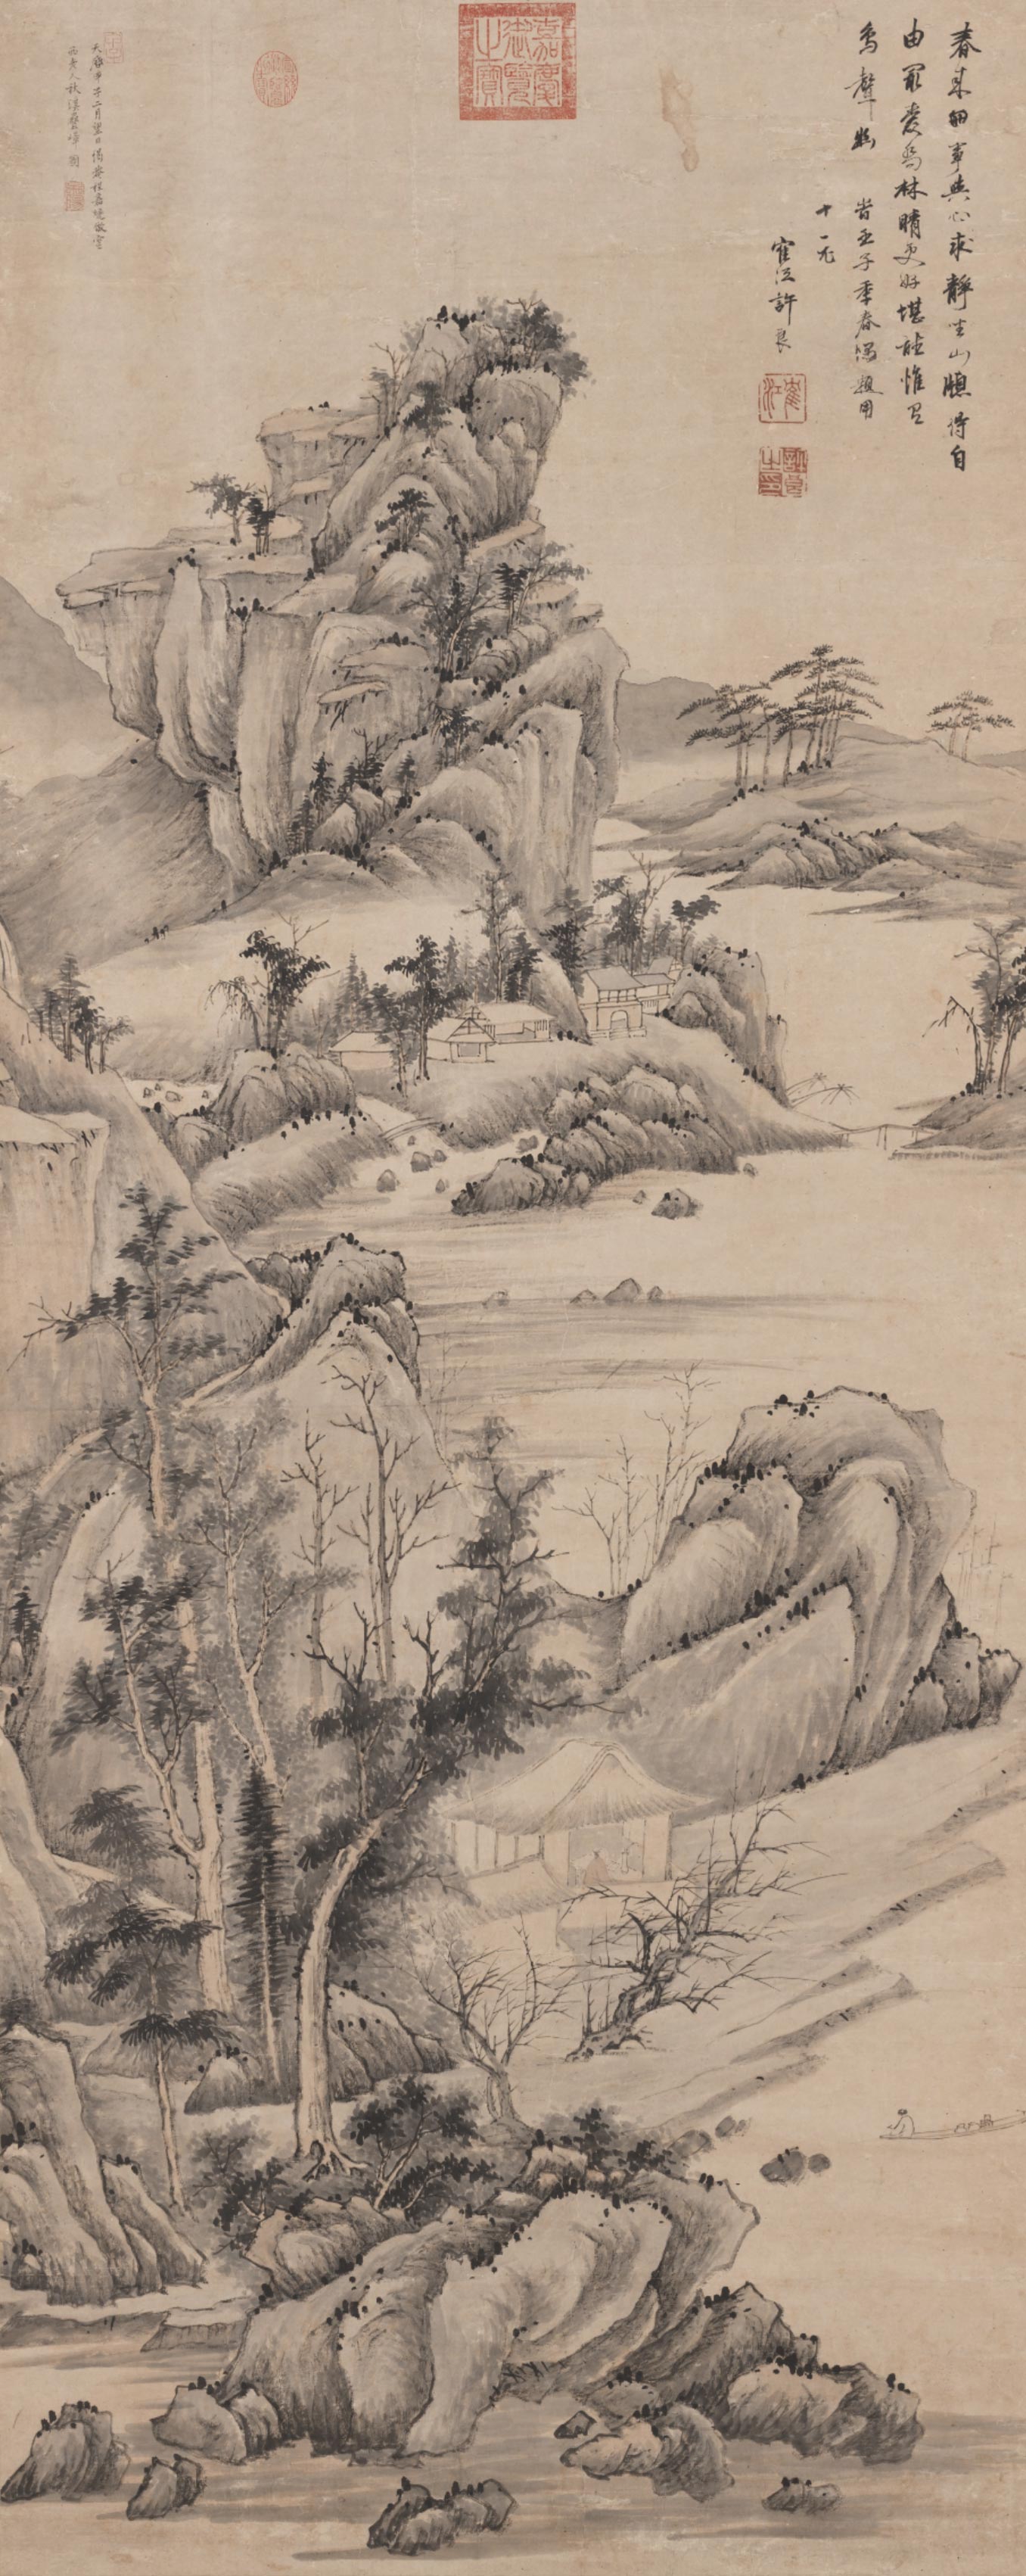 Autumn River and Massed Peaks, Cheng Chia-sui, Ming dynasty